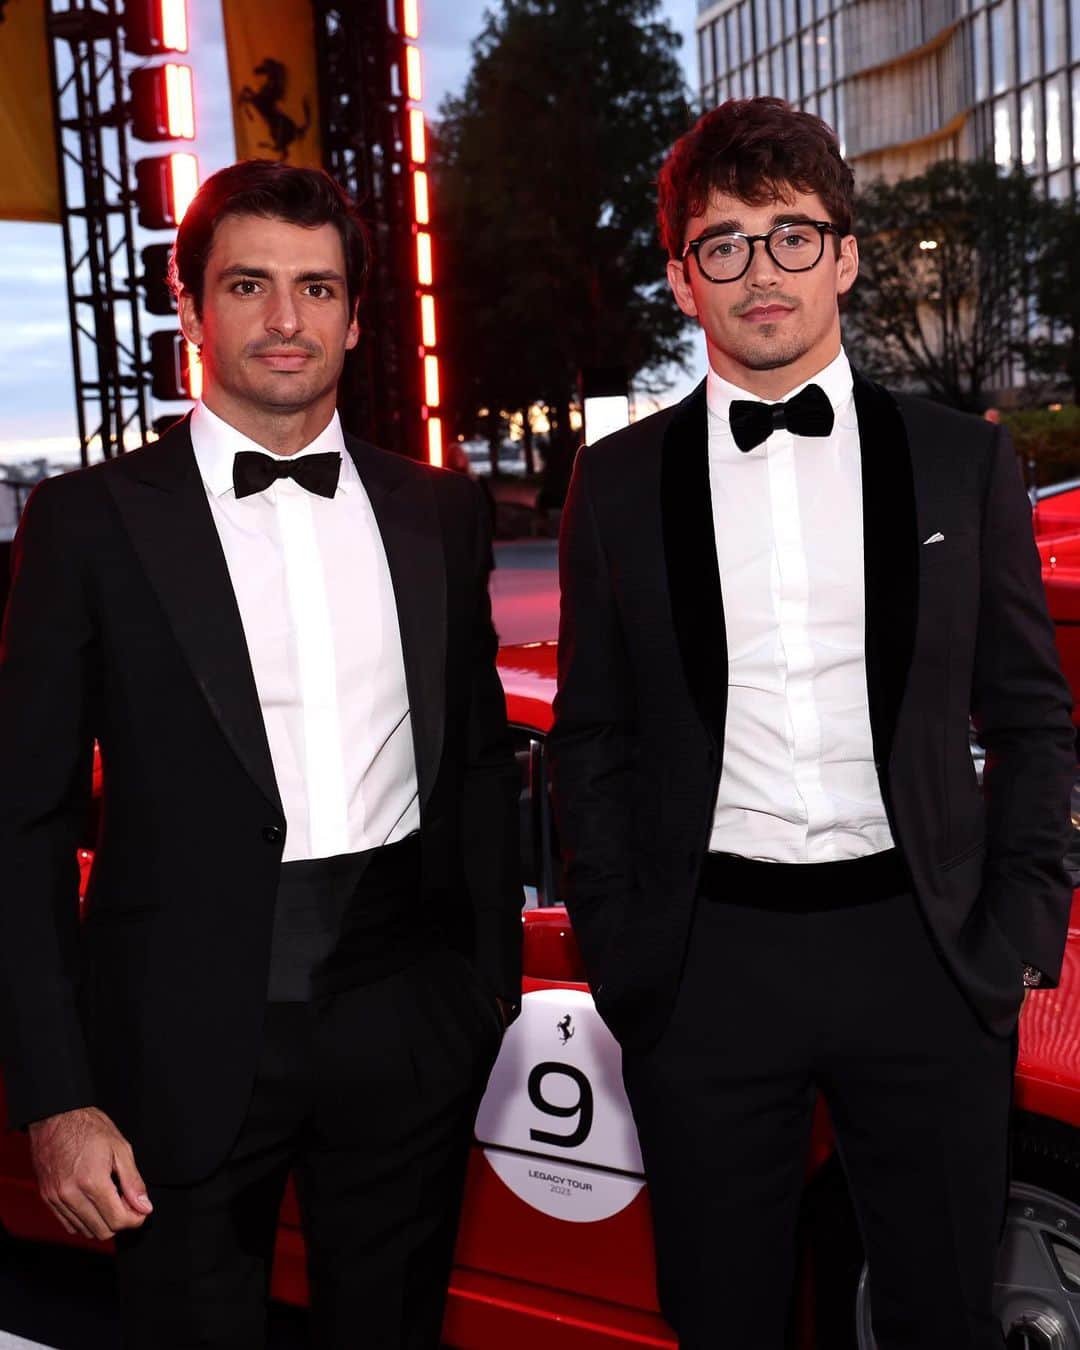 Ferrari USAのインスタグラム：「Don’t they scrub up well?! 🤵‍♂️ @charles_leclerc and @carlossainz55 - and some esteemed company - at the Ferrari Gala in NYC last night 🍎  #CharlesLeclerc #CarlosSainz」